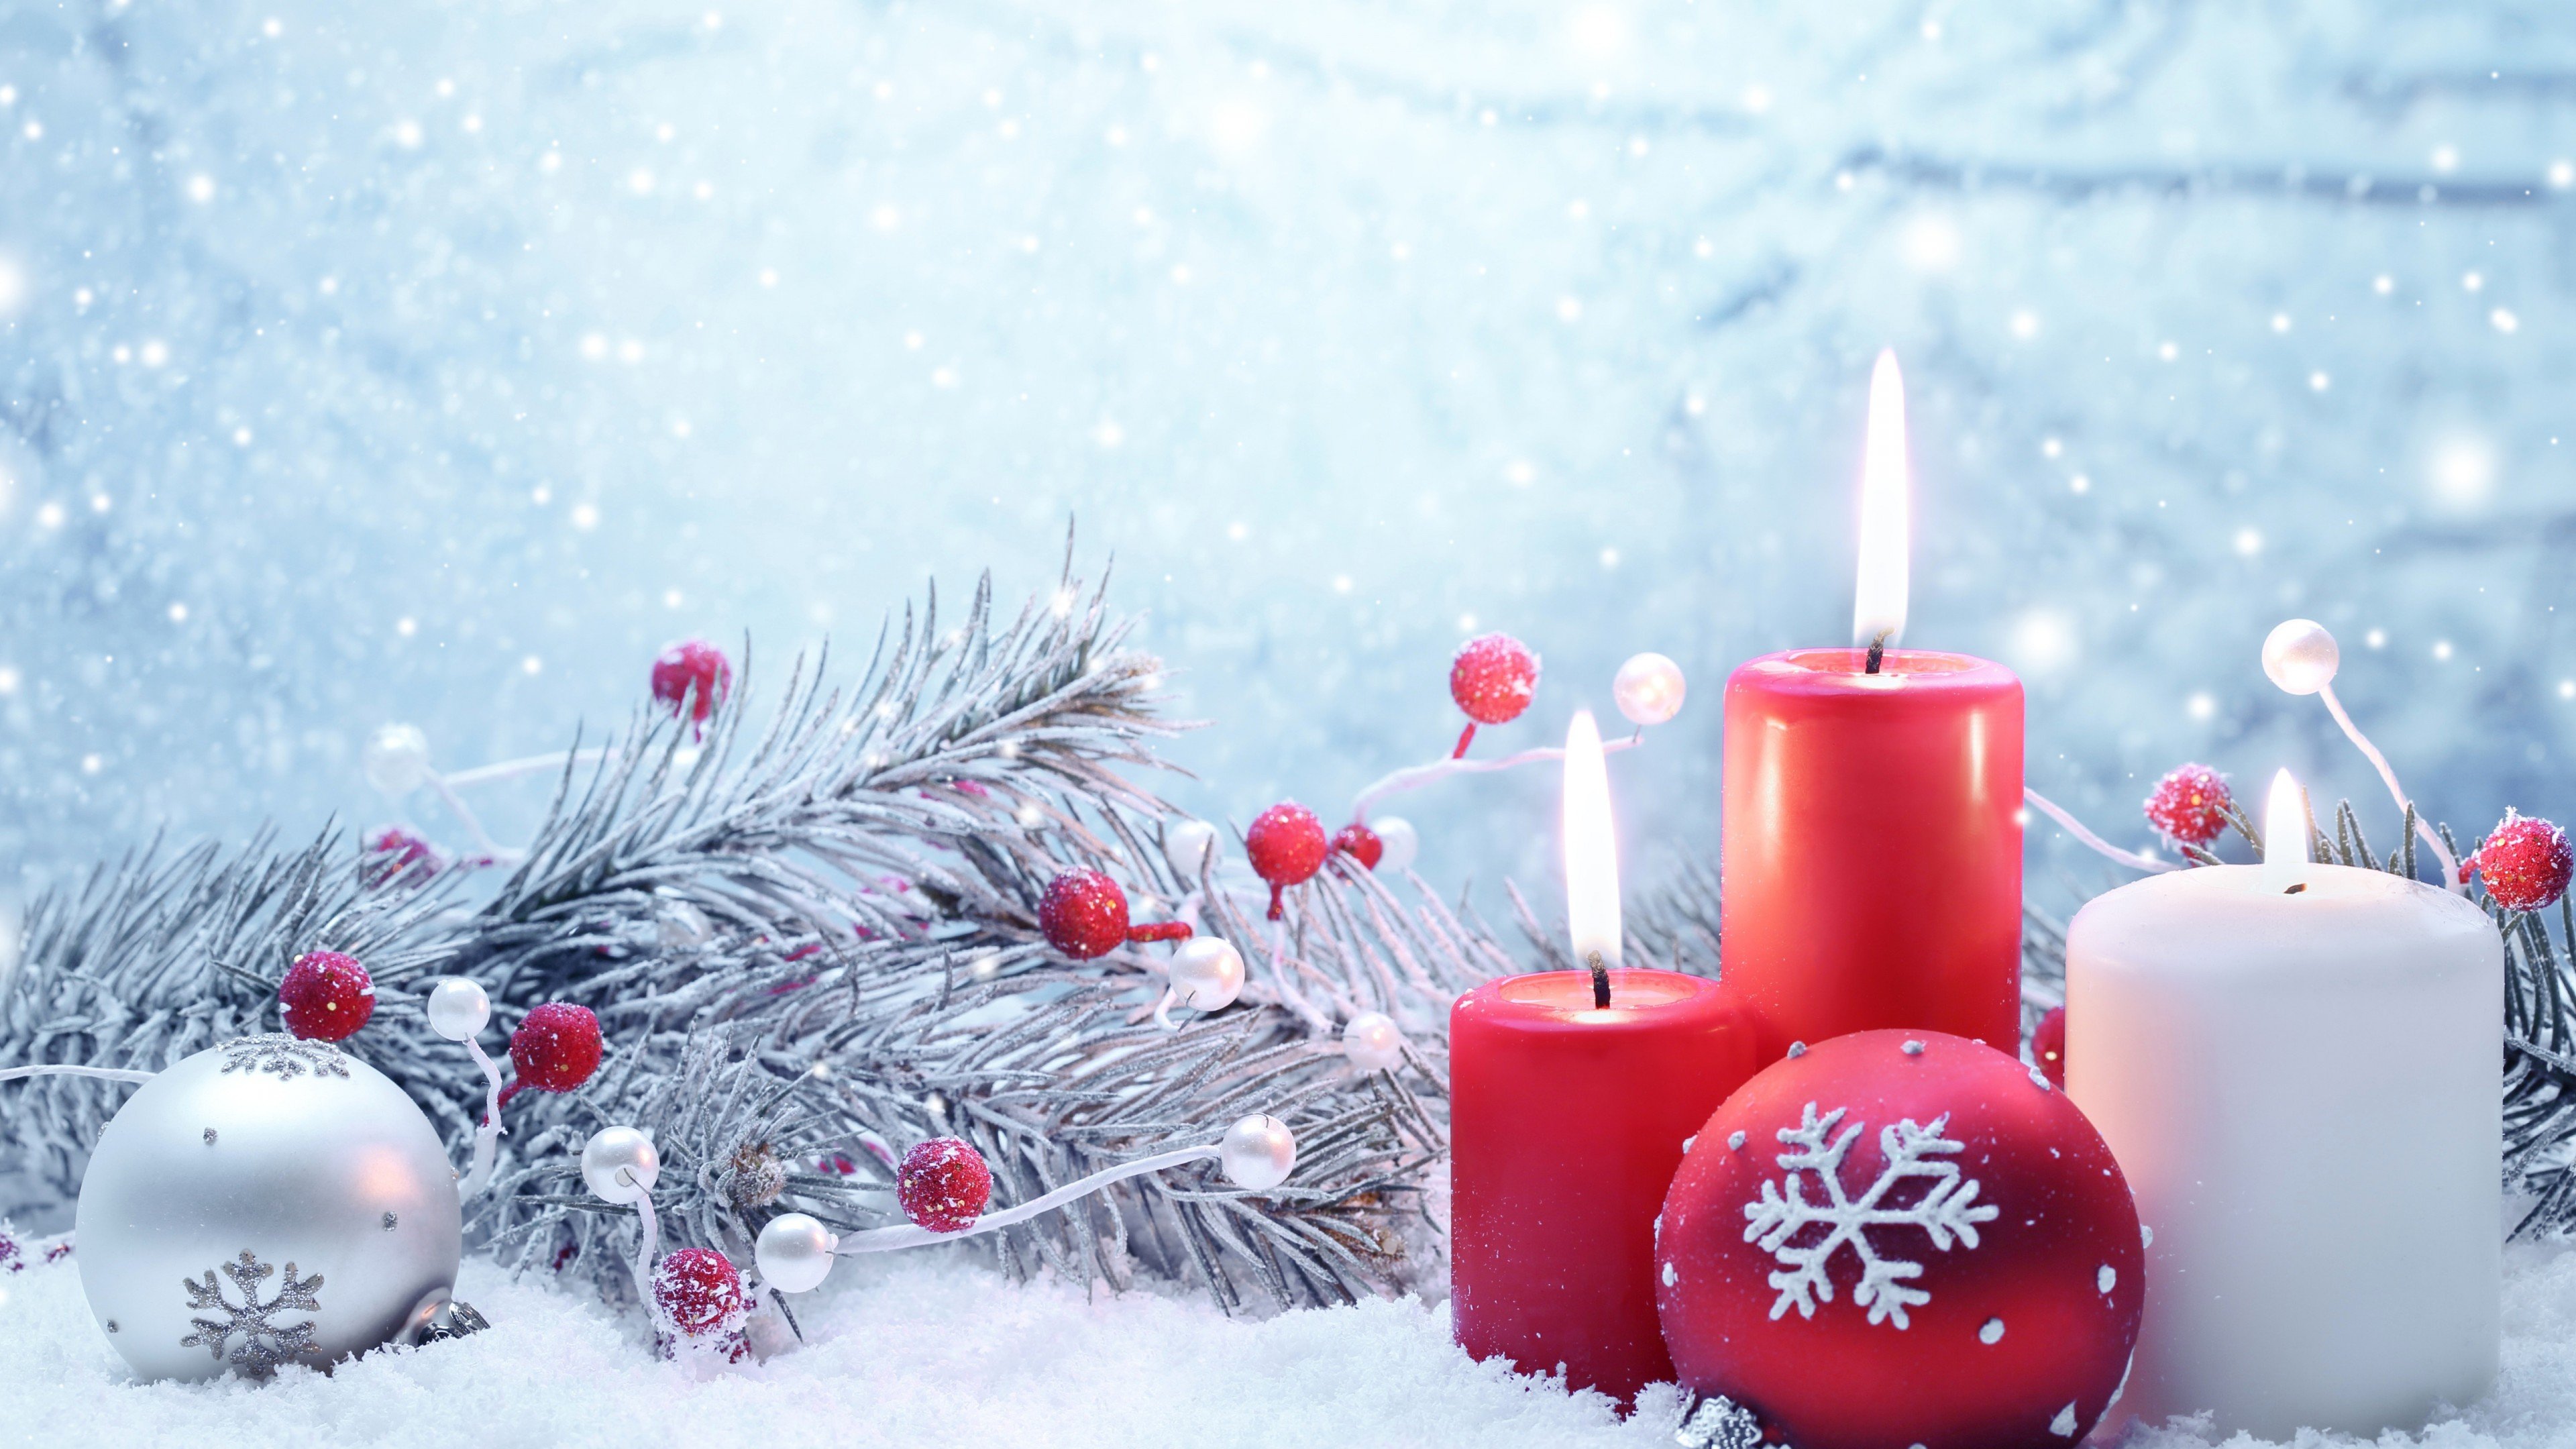 Wallpaper Christmas, New Year, Candle, Balls, Fir Tree, Snowflakes, Snow, Decorations, Holidays